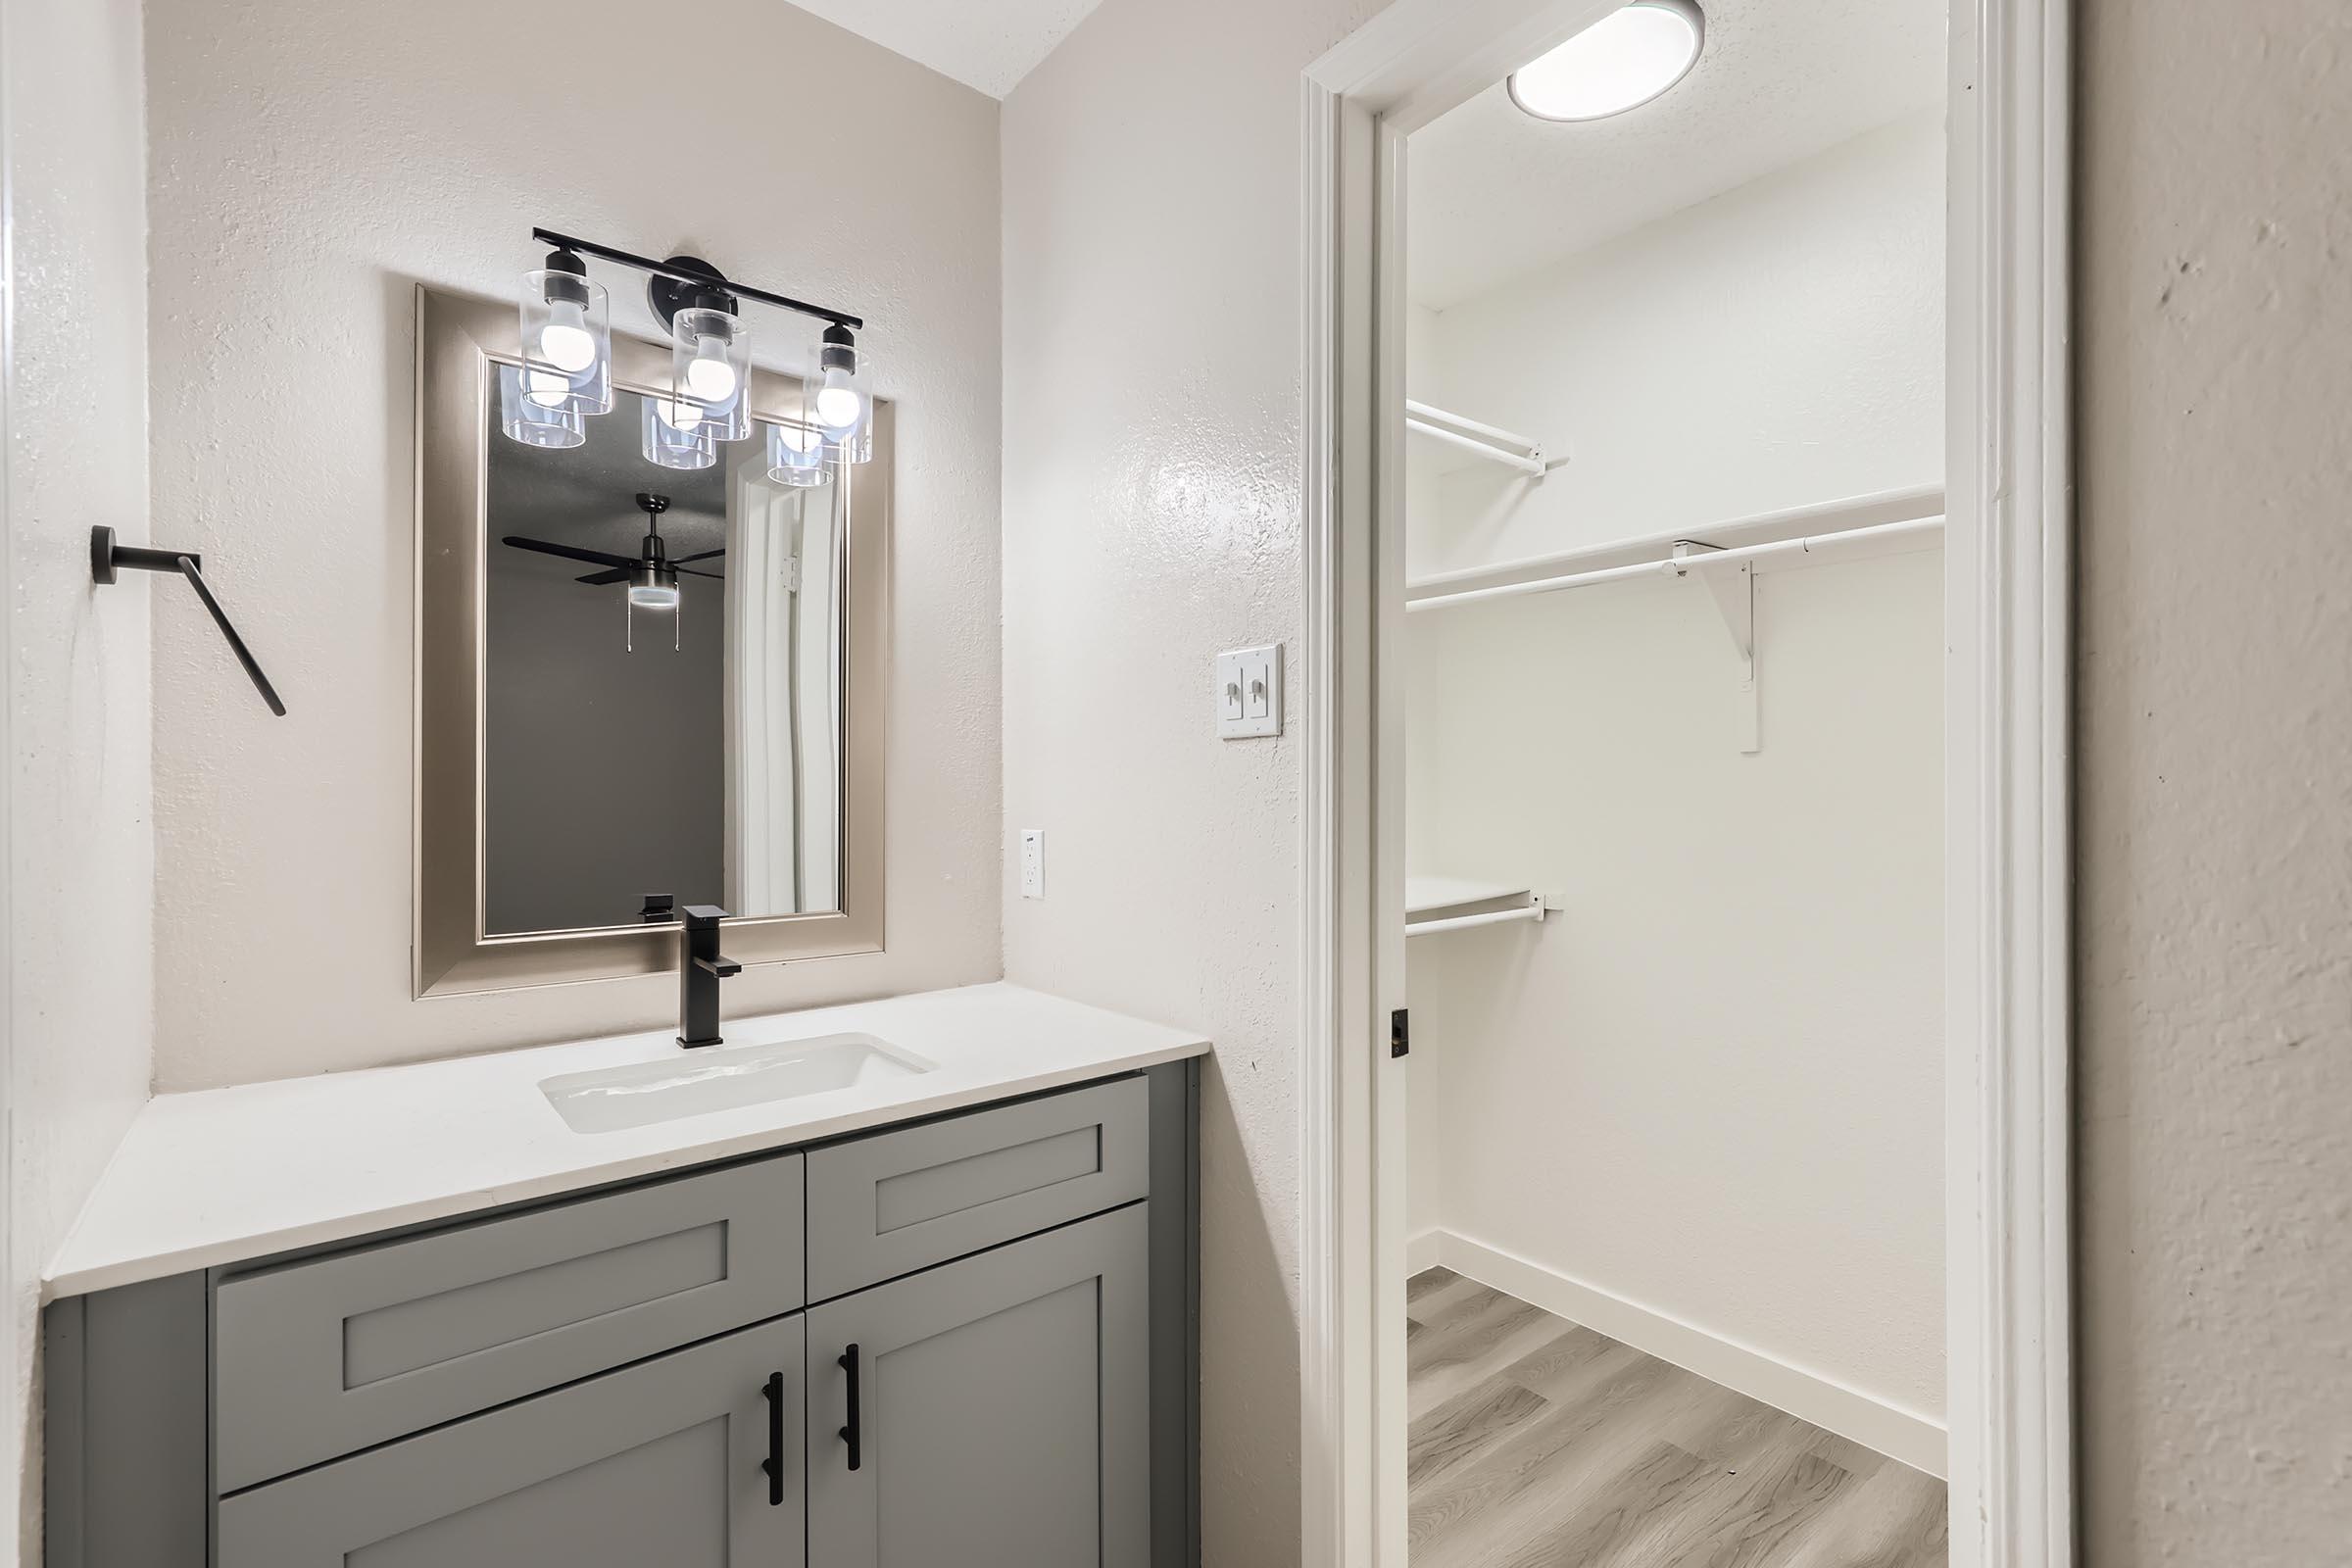 A remodeled bathroom with a separate toilet area at Rise Oak Creek.